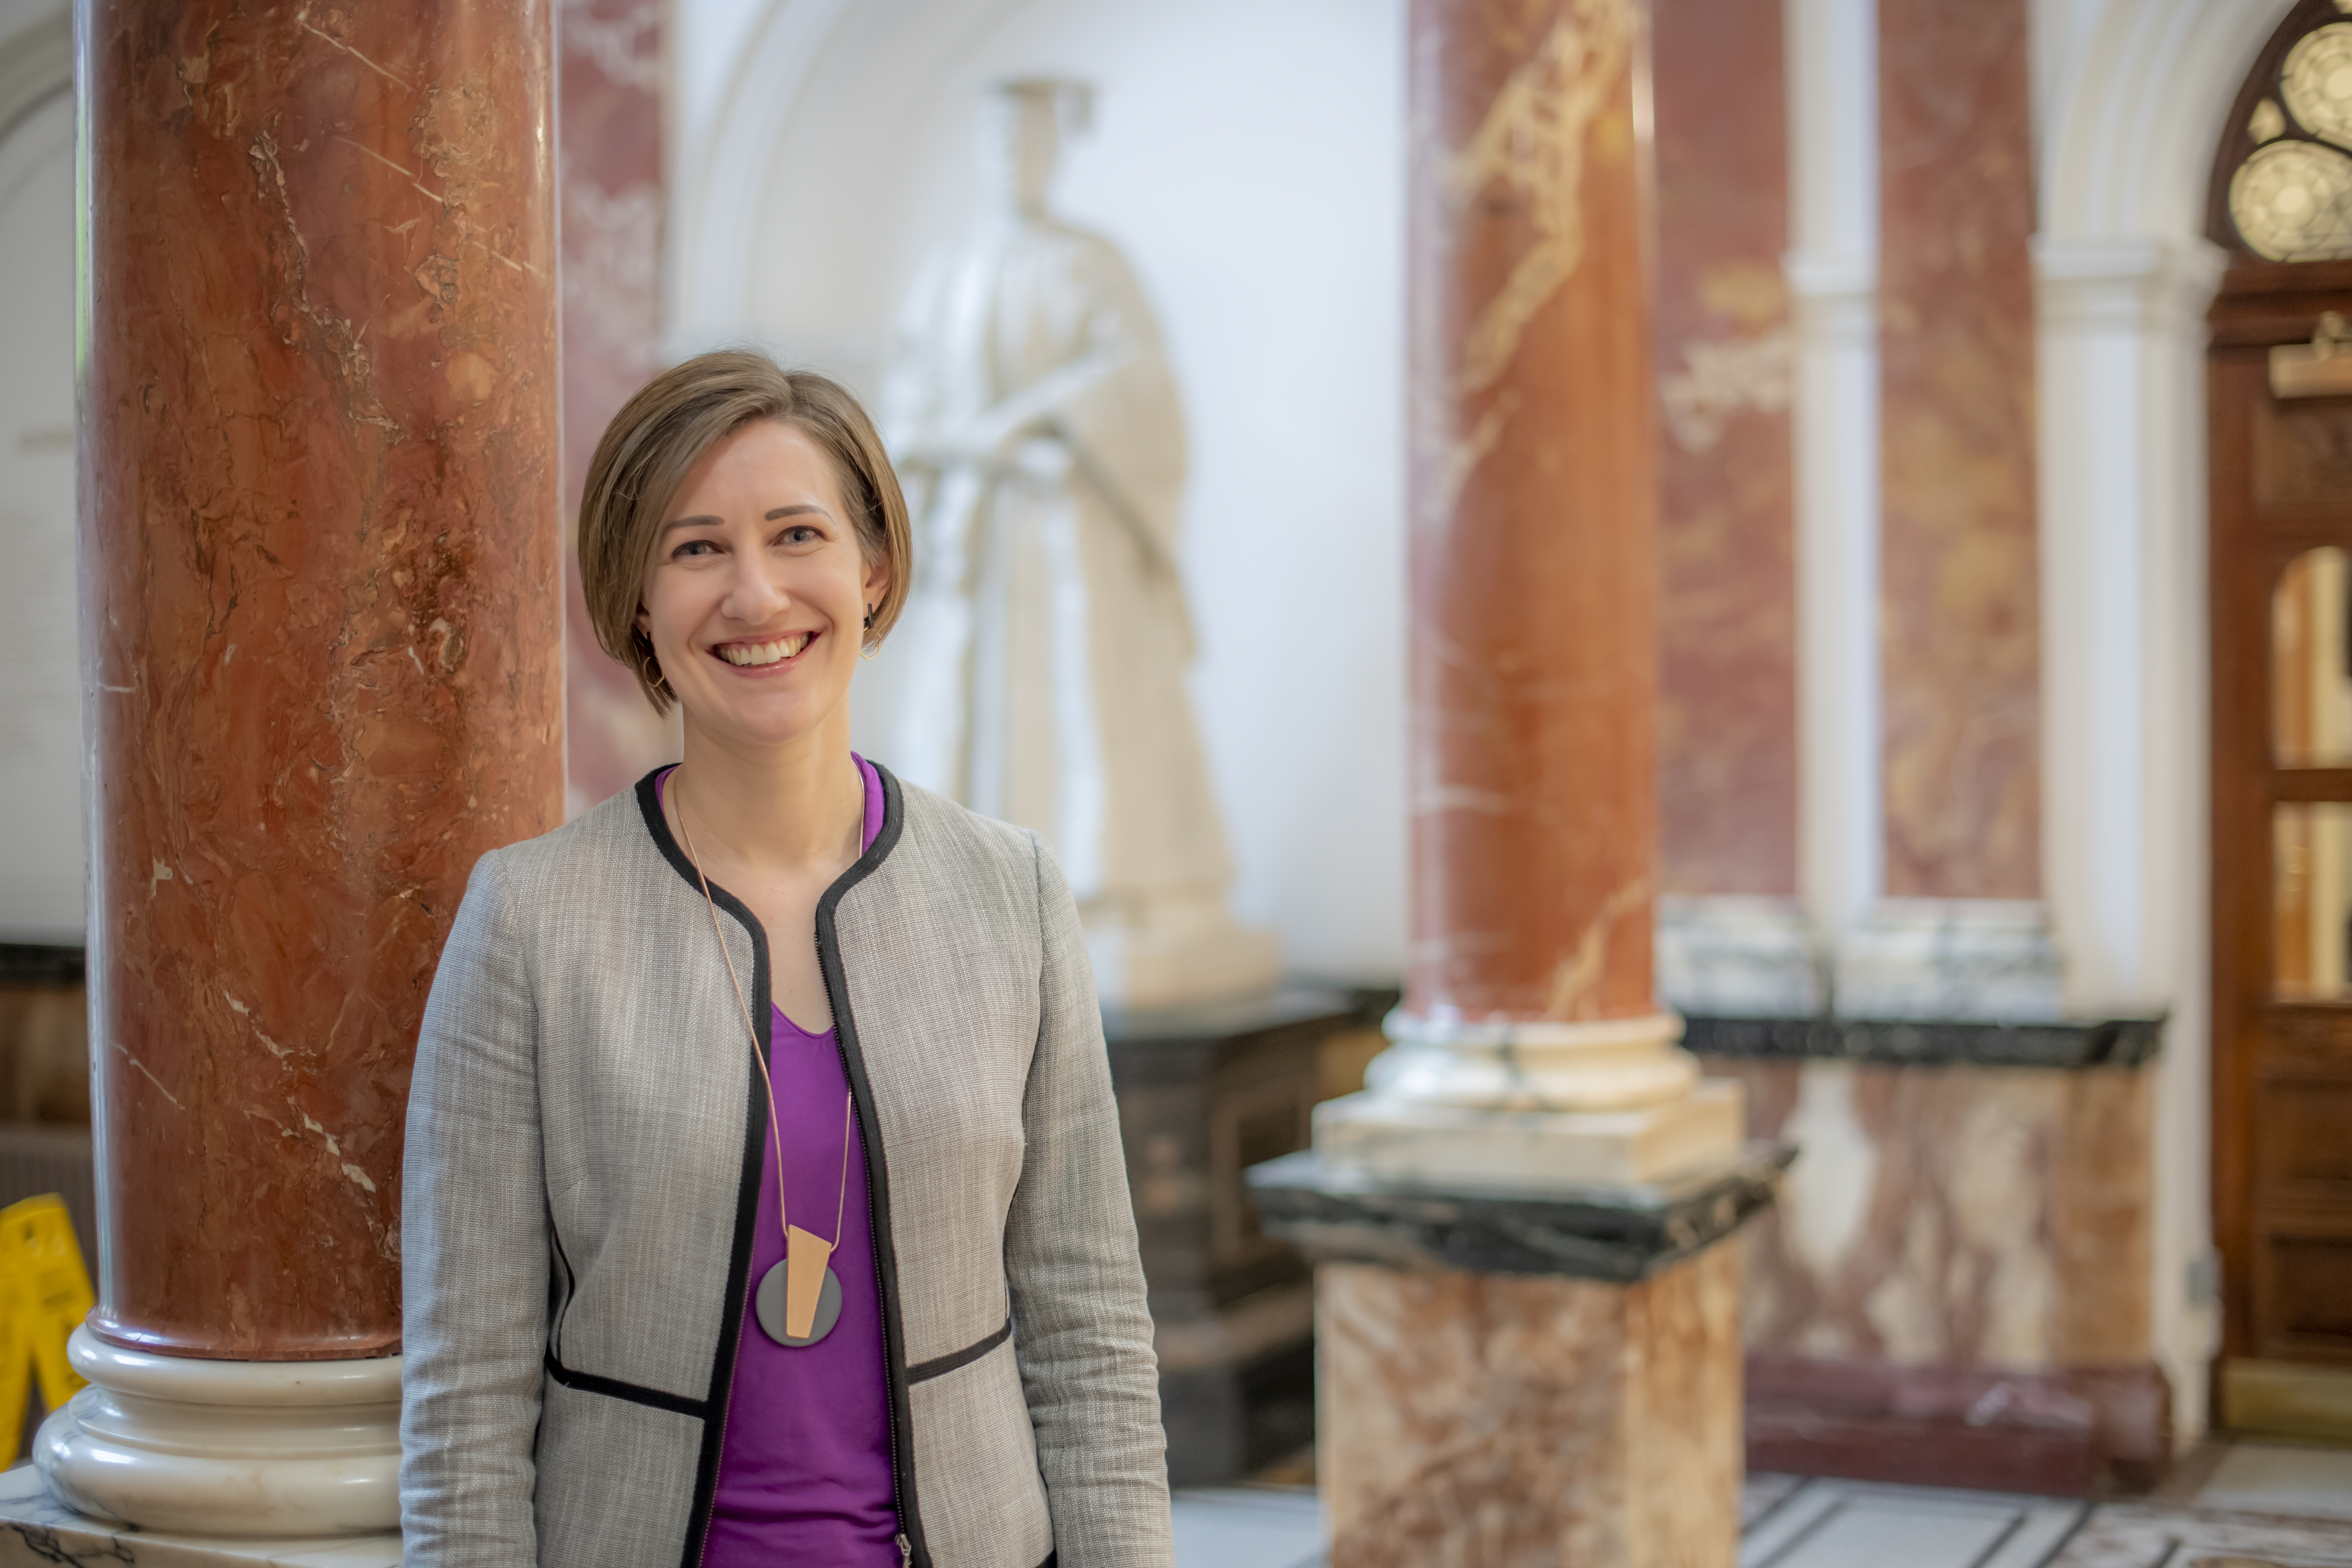 A woman with short brown hair standing in the RCM foyer smiling at the camera